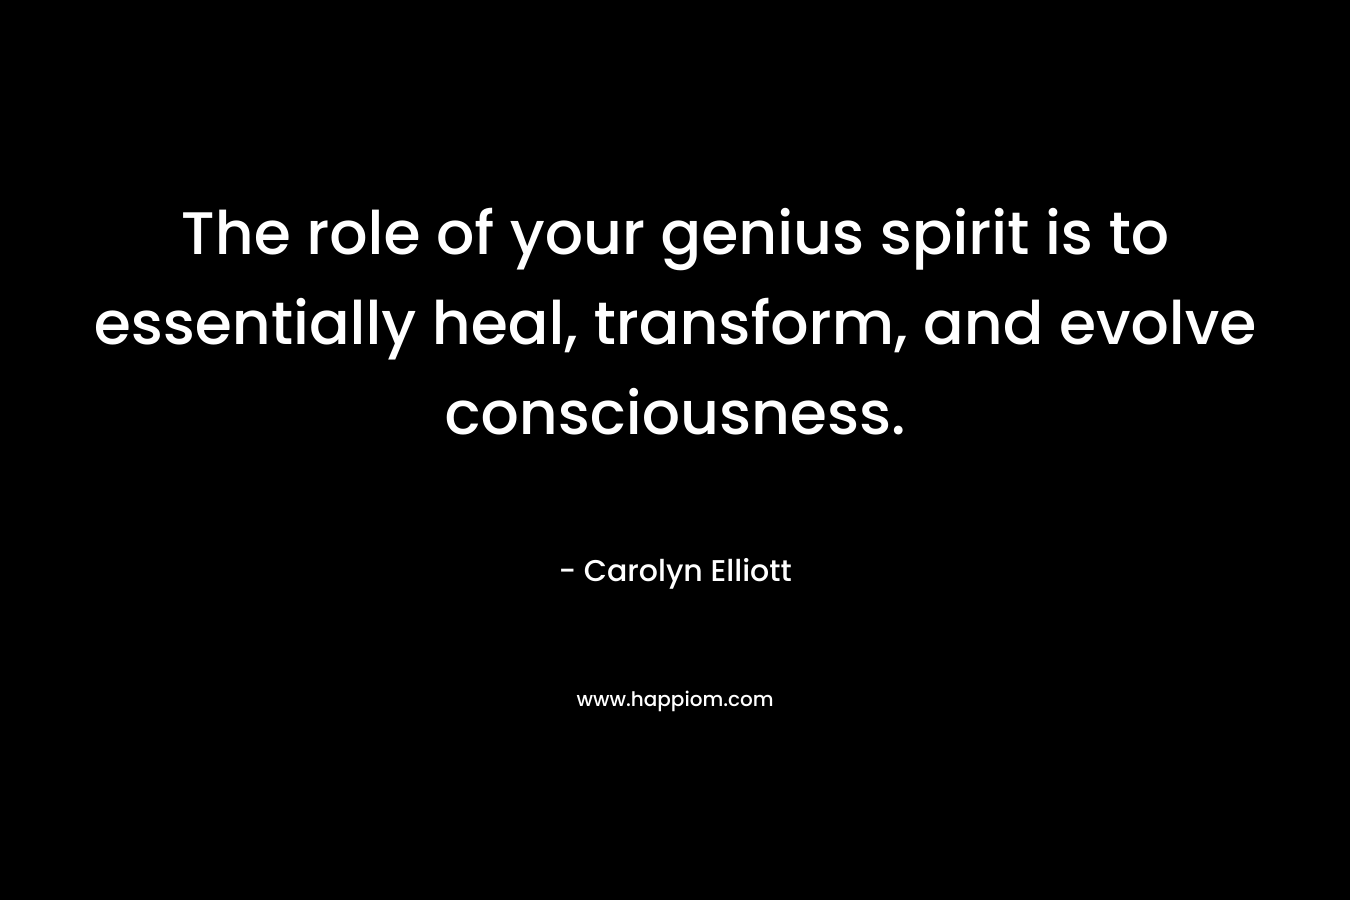 The role of your genius spirit is to essentially heal, transform, and evolve consciousness.